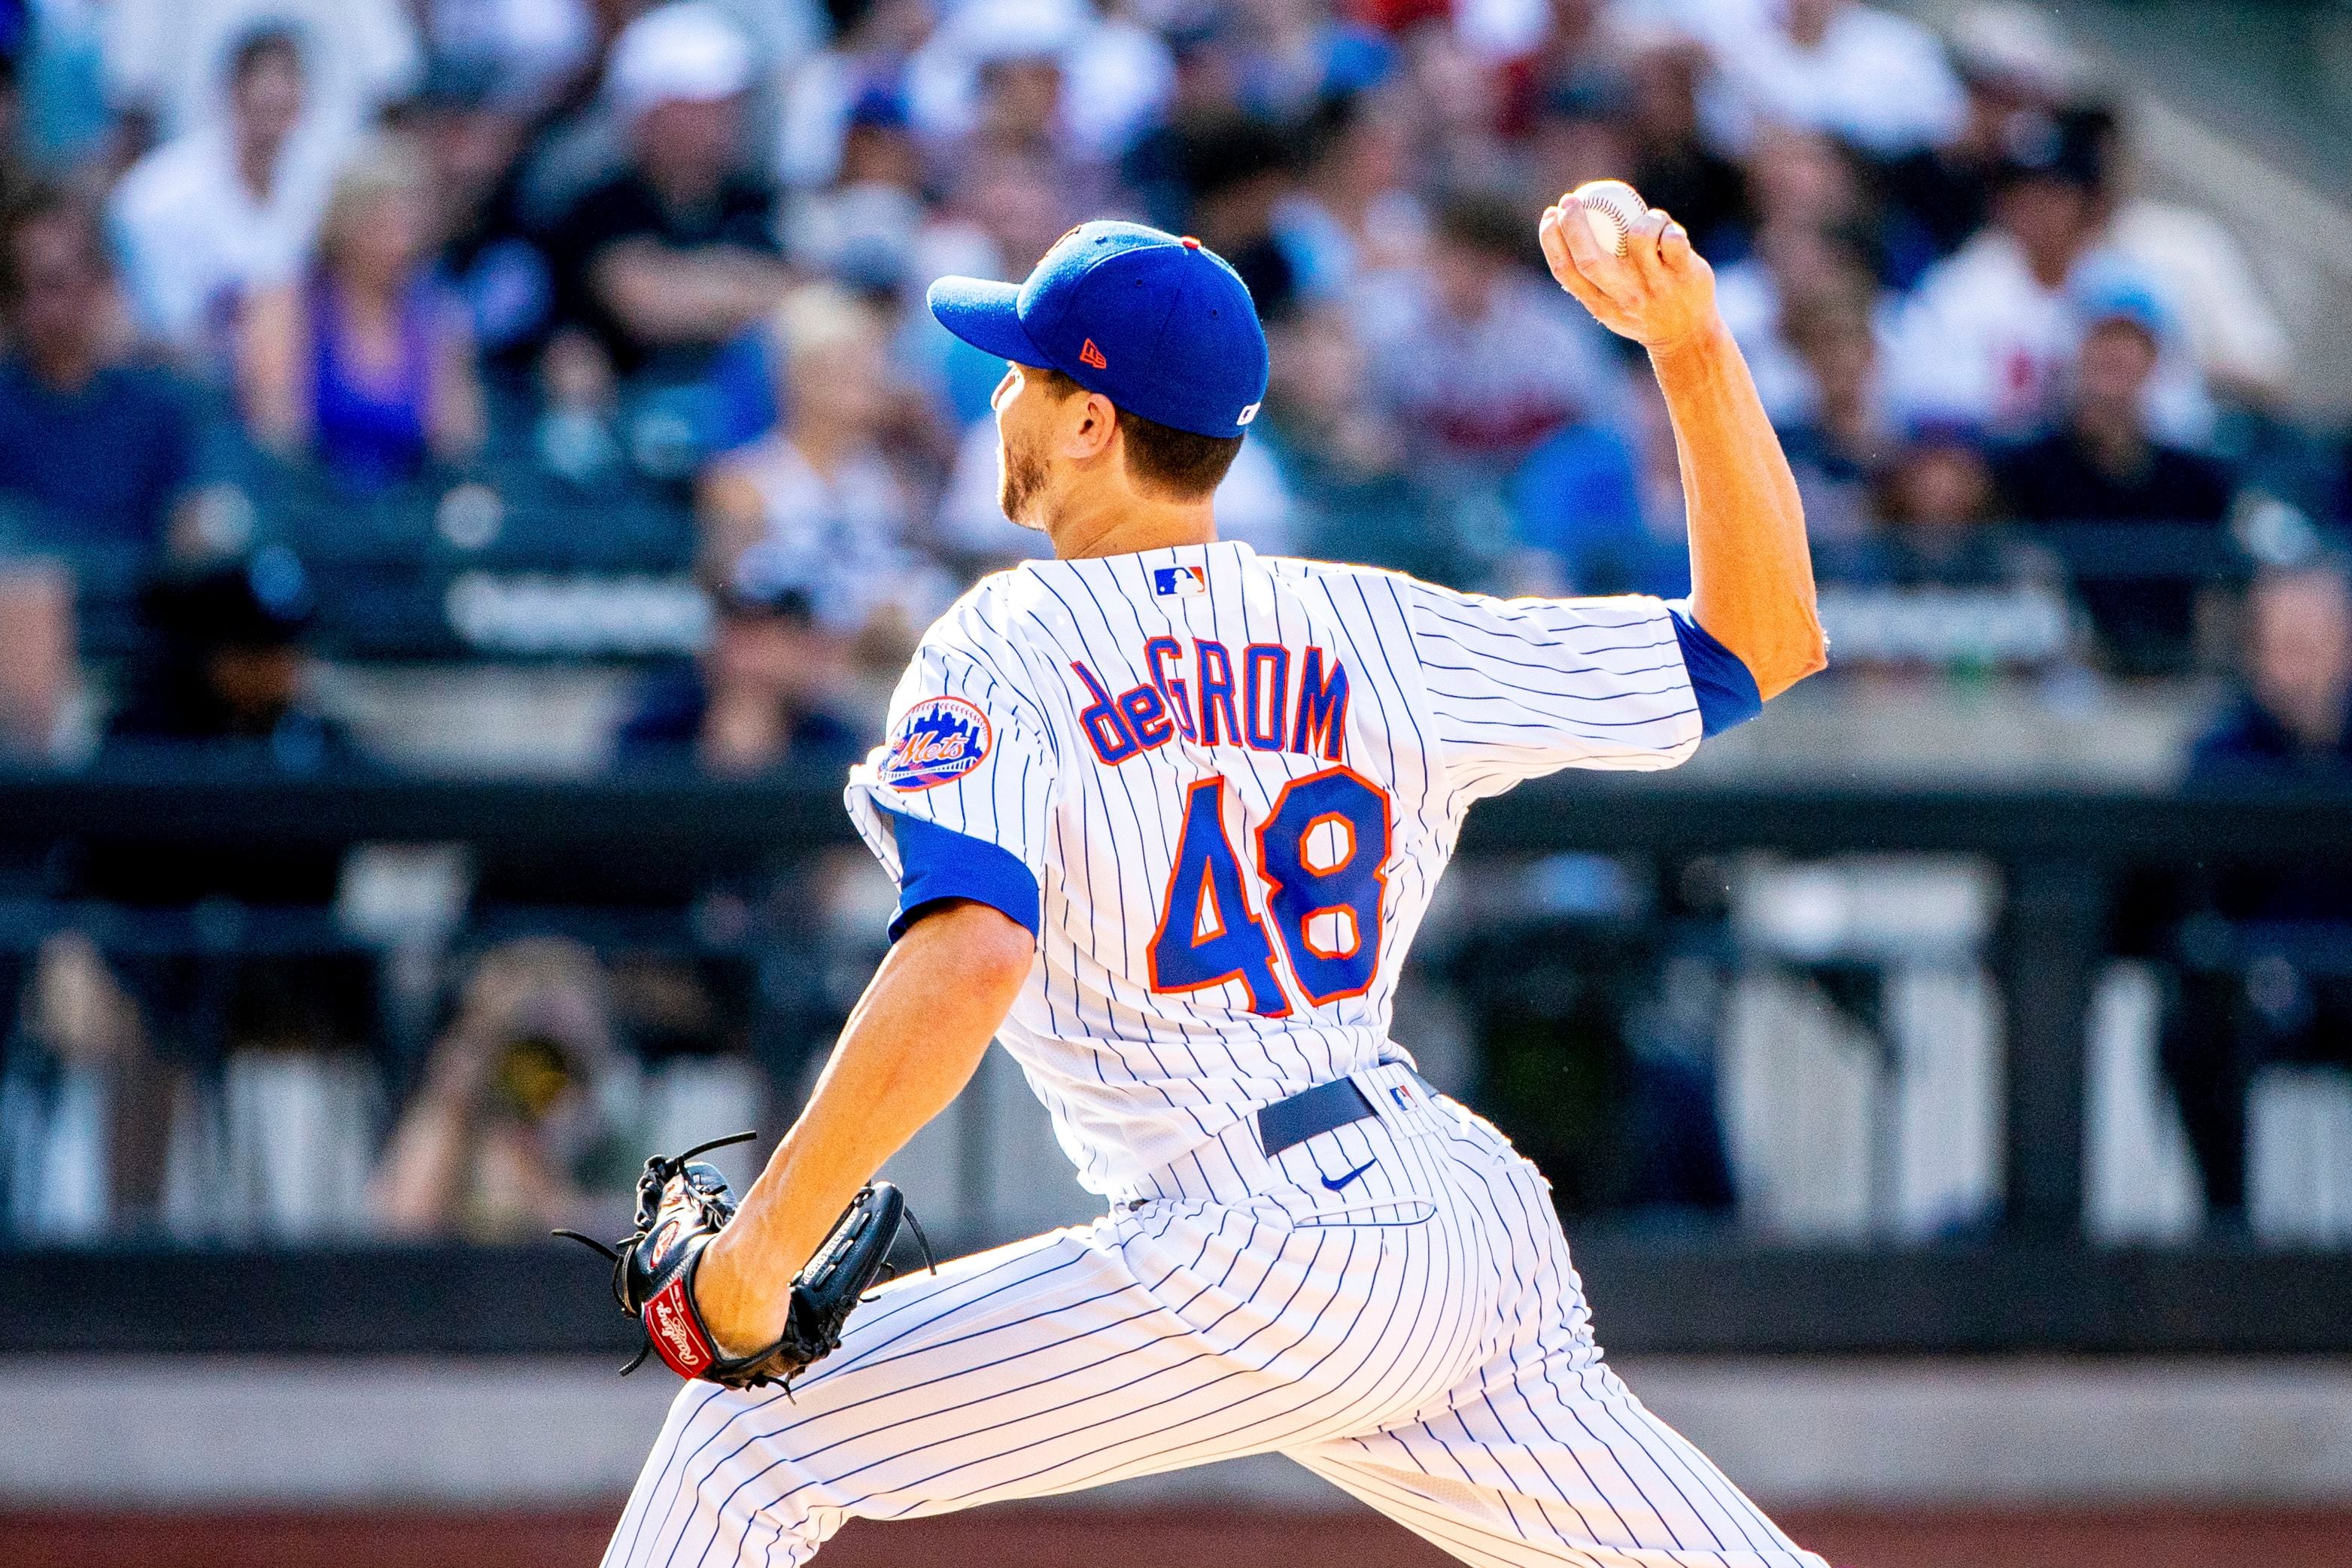 Jacob deGrom ends Mets' injury concerns in win over Braves